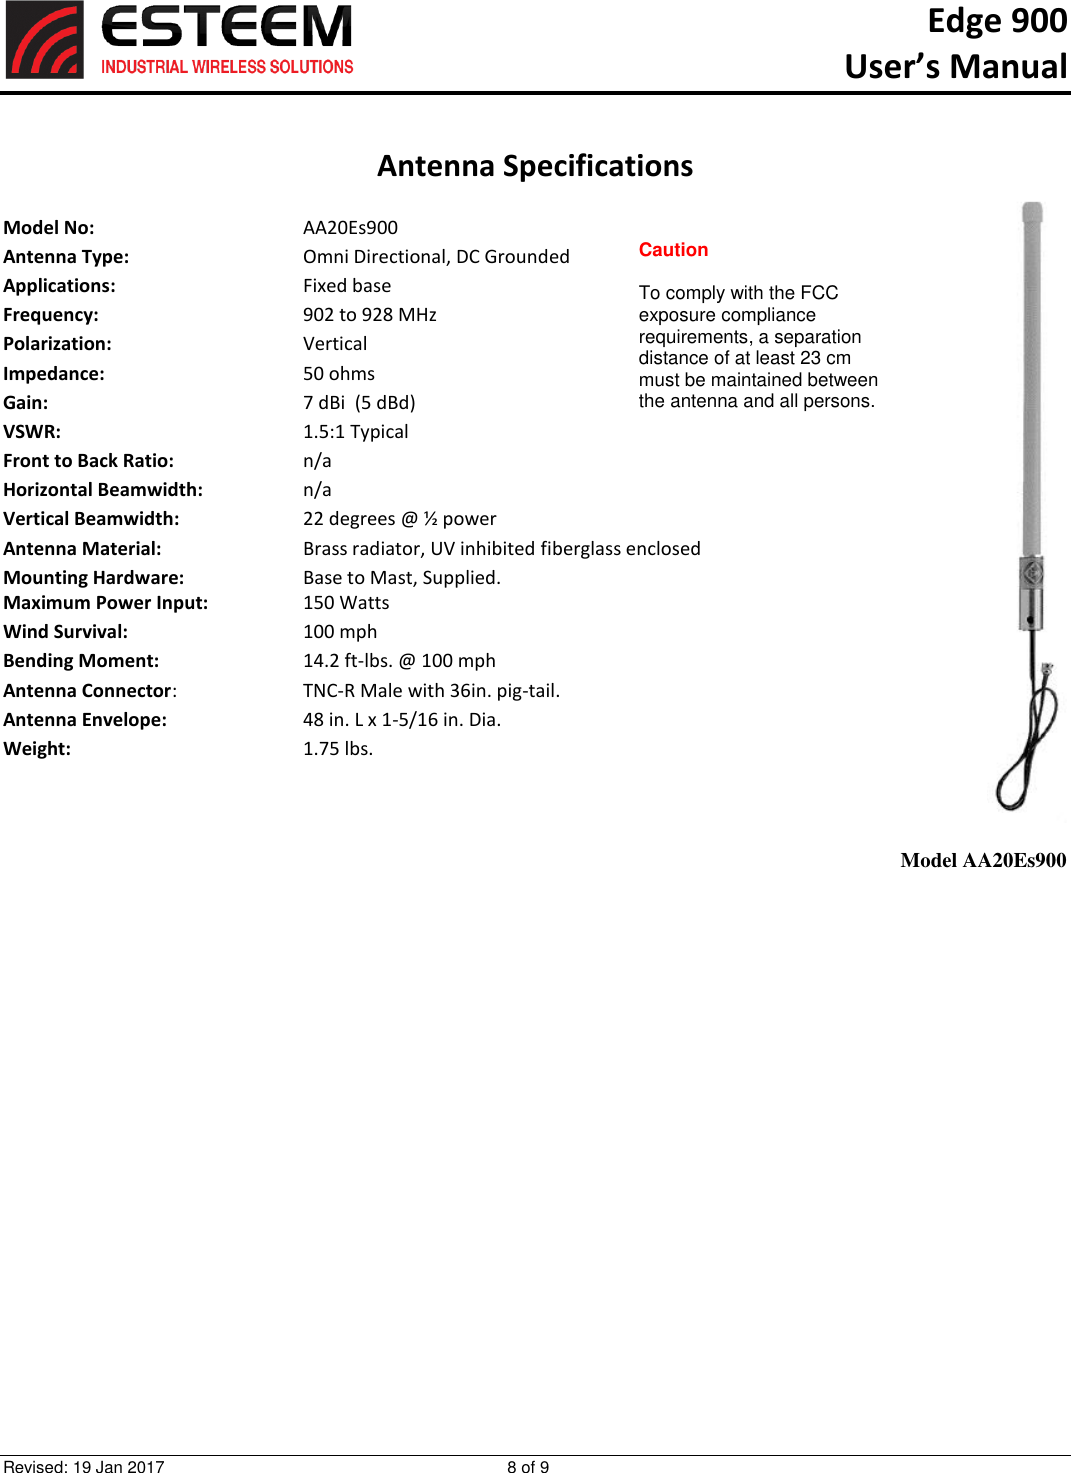 Edge 900   User’s Manual  Revised: 19 Jan 2017  8 of 9   Antenna Specifications  Model No:      AA20Es900 Antenna Type:      Omni Directional, DC Grounded Applications:      Fixed base Frequency:      902 to 928 MHz  Polarization:      Vertical Impedance:      50 ohms Gain:        7 dBi  (5 dBd) VSWR:        1.5:1 Typical  Front to Back Ratio:    n/a Horizontal Beamwidth:    n/a Vertical Beamwidth:      22 degrees @ ½ power Antenna Material:    Brass radiator, UV inhibited fiberglass enclosed  Mounting Hardware:      Base to Mast, Supplied.  Maximum Power Input:    150 Watts Wind Survival:    100 mph Bending Moment:    14.2 ft-lbs. @ 100 mph Antenna Connector:    TNC-R Male with 36in. pig-tail. Antenna Envelope:    48 in. L x 1-5/16 in. Dia. Weight:      1.75 lbs.     Model AA20Es900 Caution  To comply with the FCC exposure compliance requirements, a separation distance of at least 23 cm must be maintained between the antenna and all persons.  